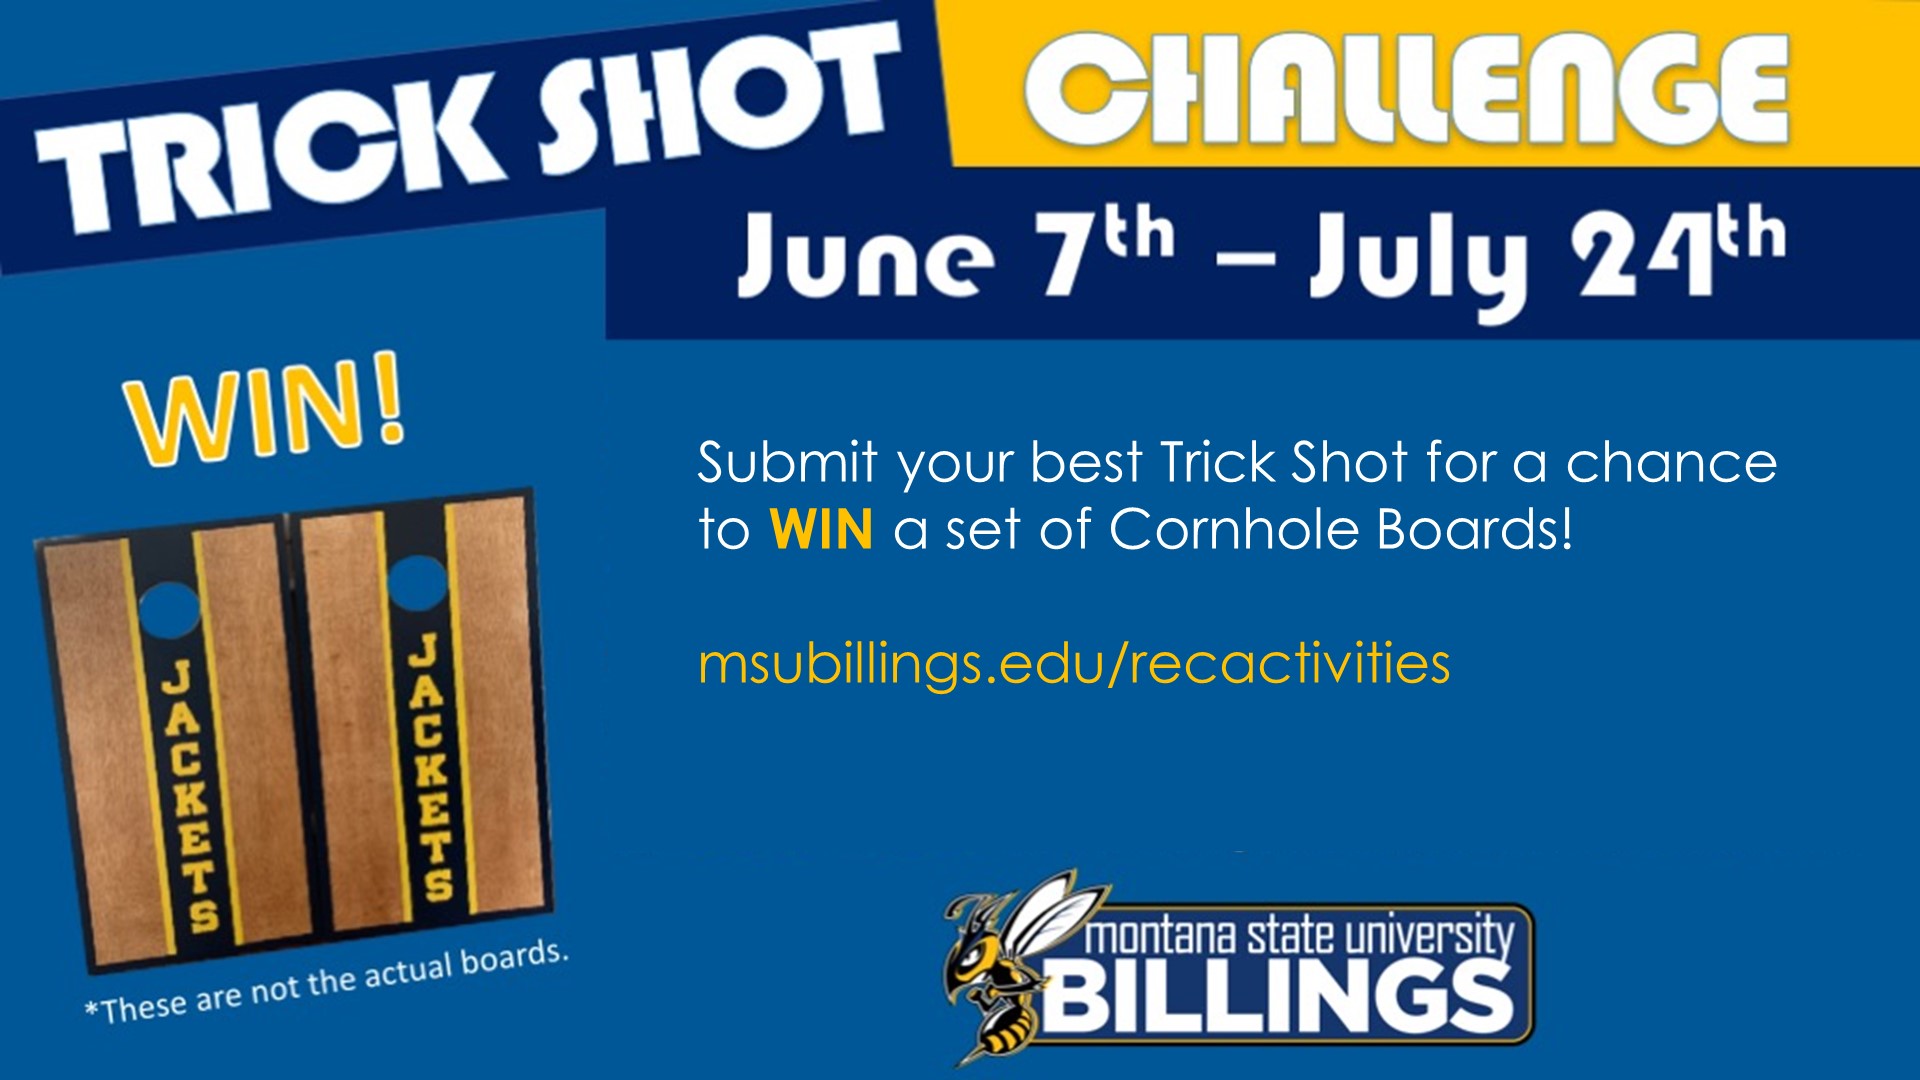 Trick Shot Challenge June 7-24; Submit your best Trick  Shot for a chance to WIN a set of Cornhole Boards - msubillings.edu/recactivities